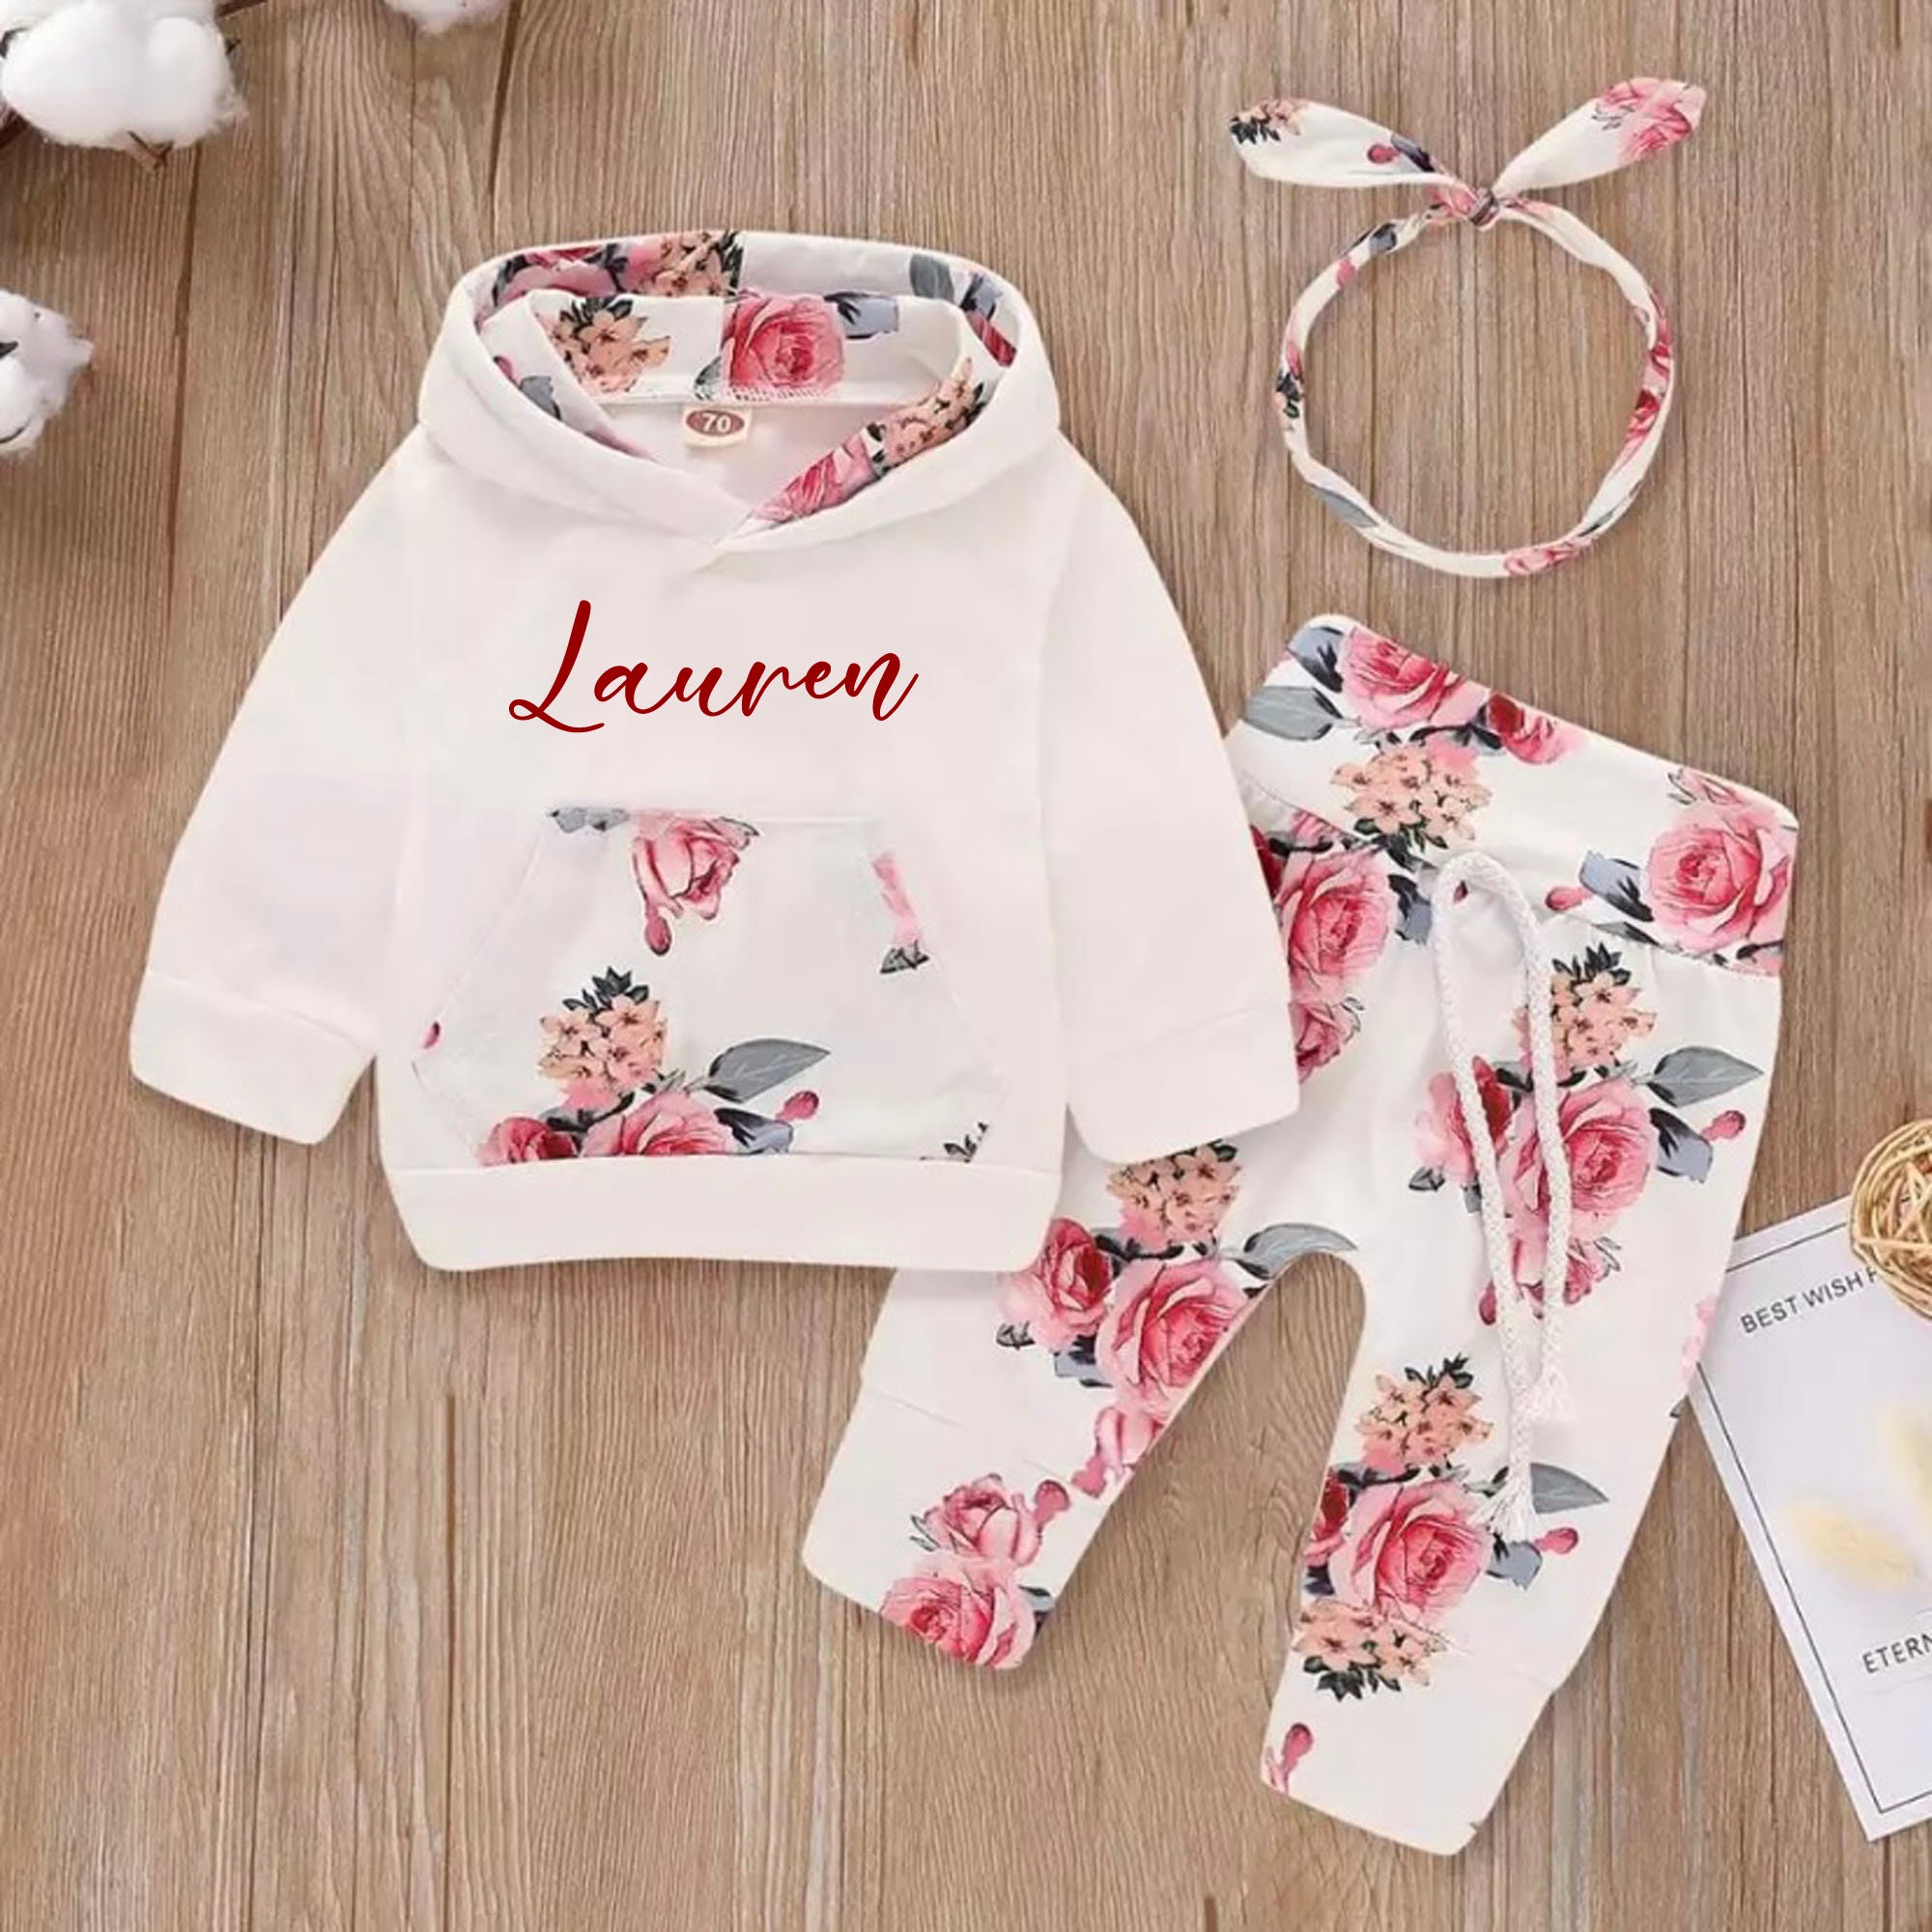 Winter Wear For Baby Girl Images | lupon.gov.ph